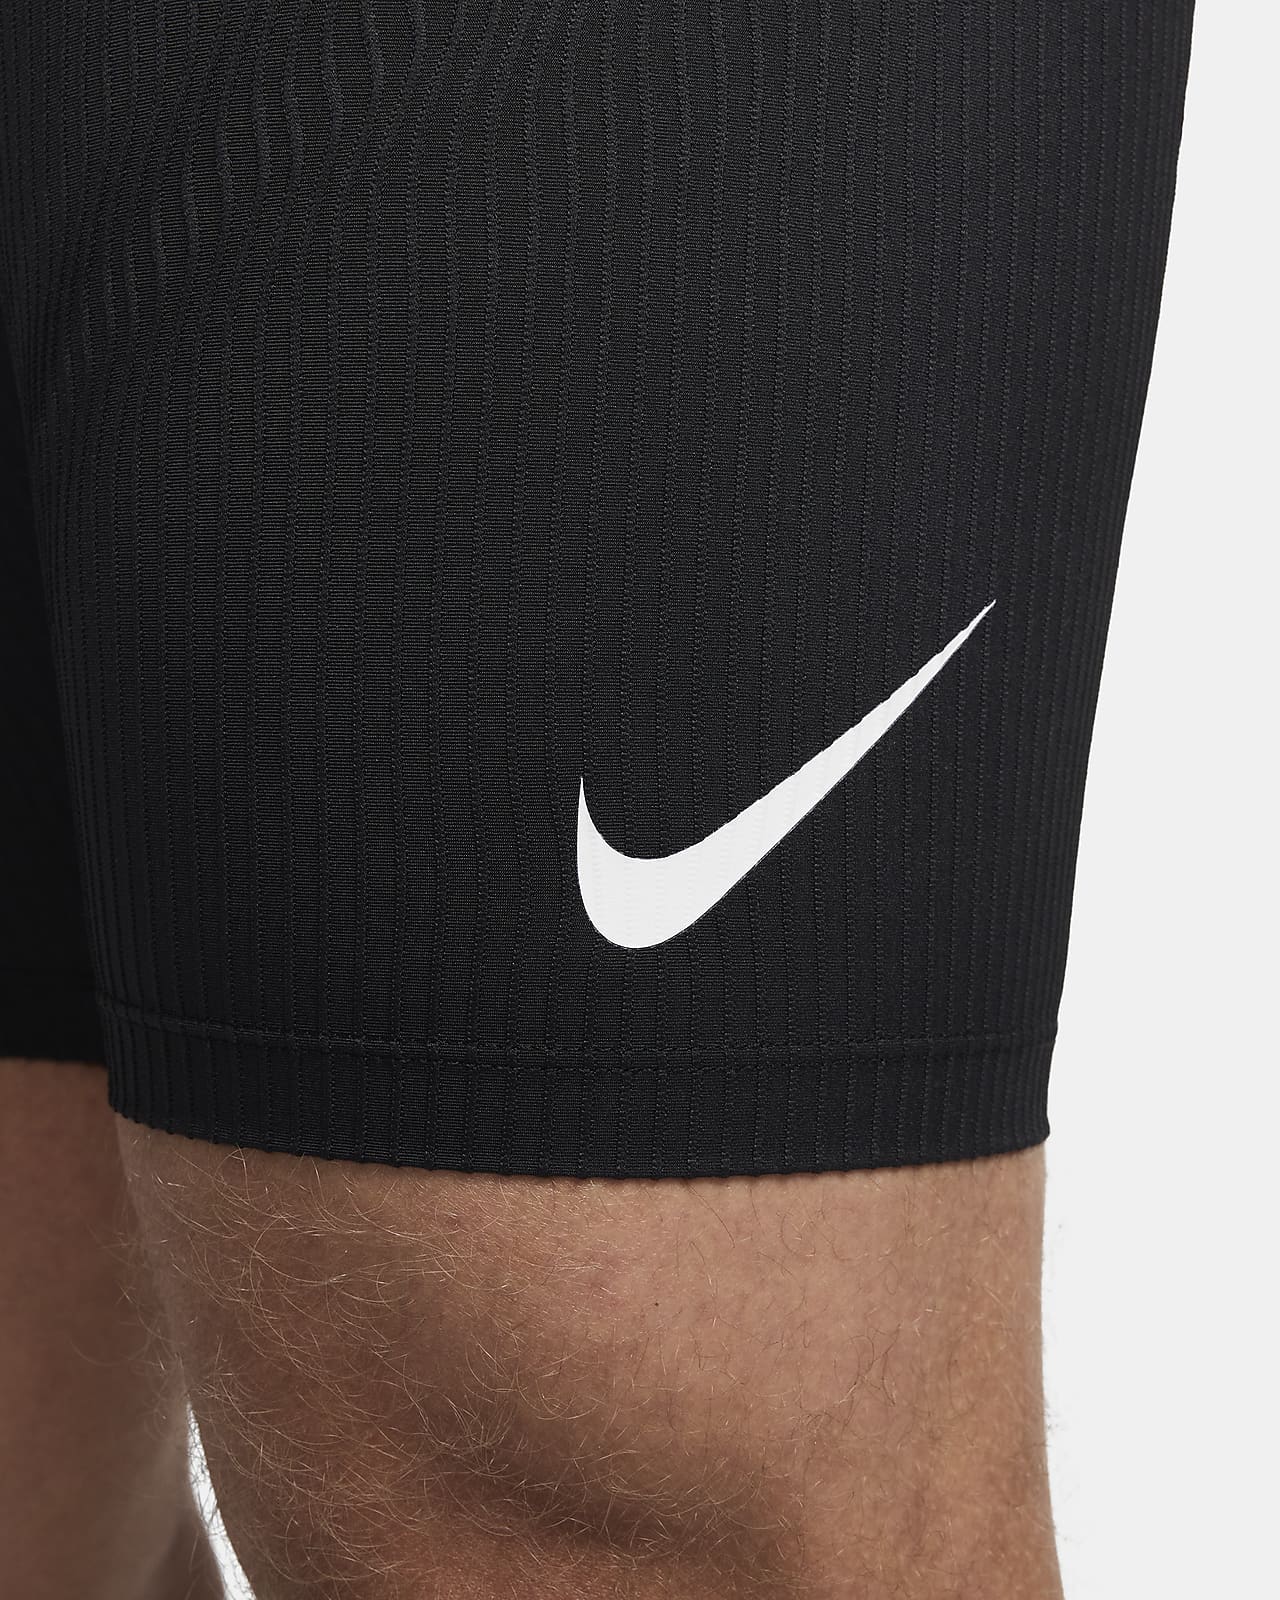 NIKE AEROSWIFT Tights Review (2020) 